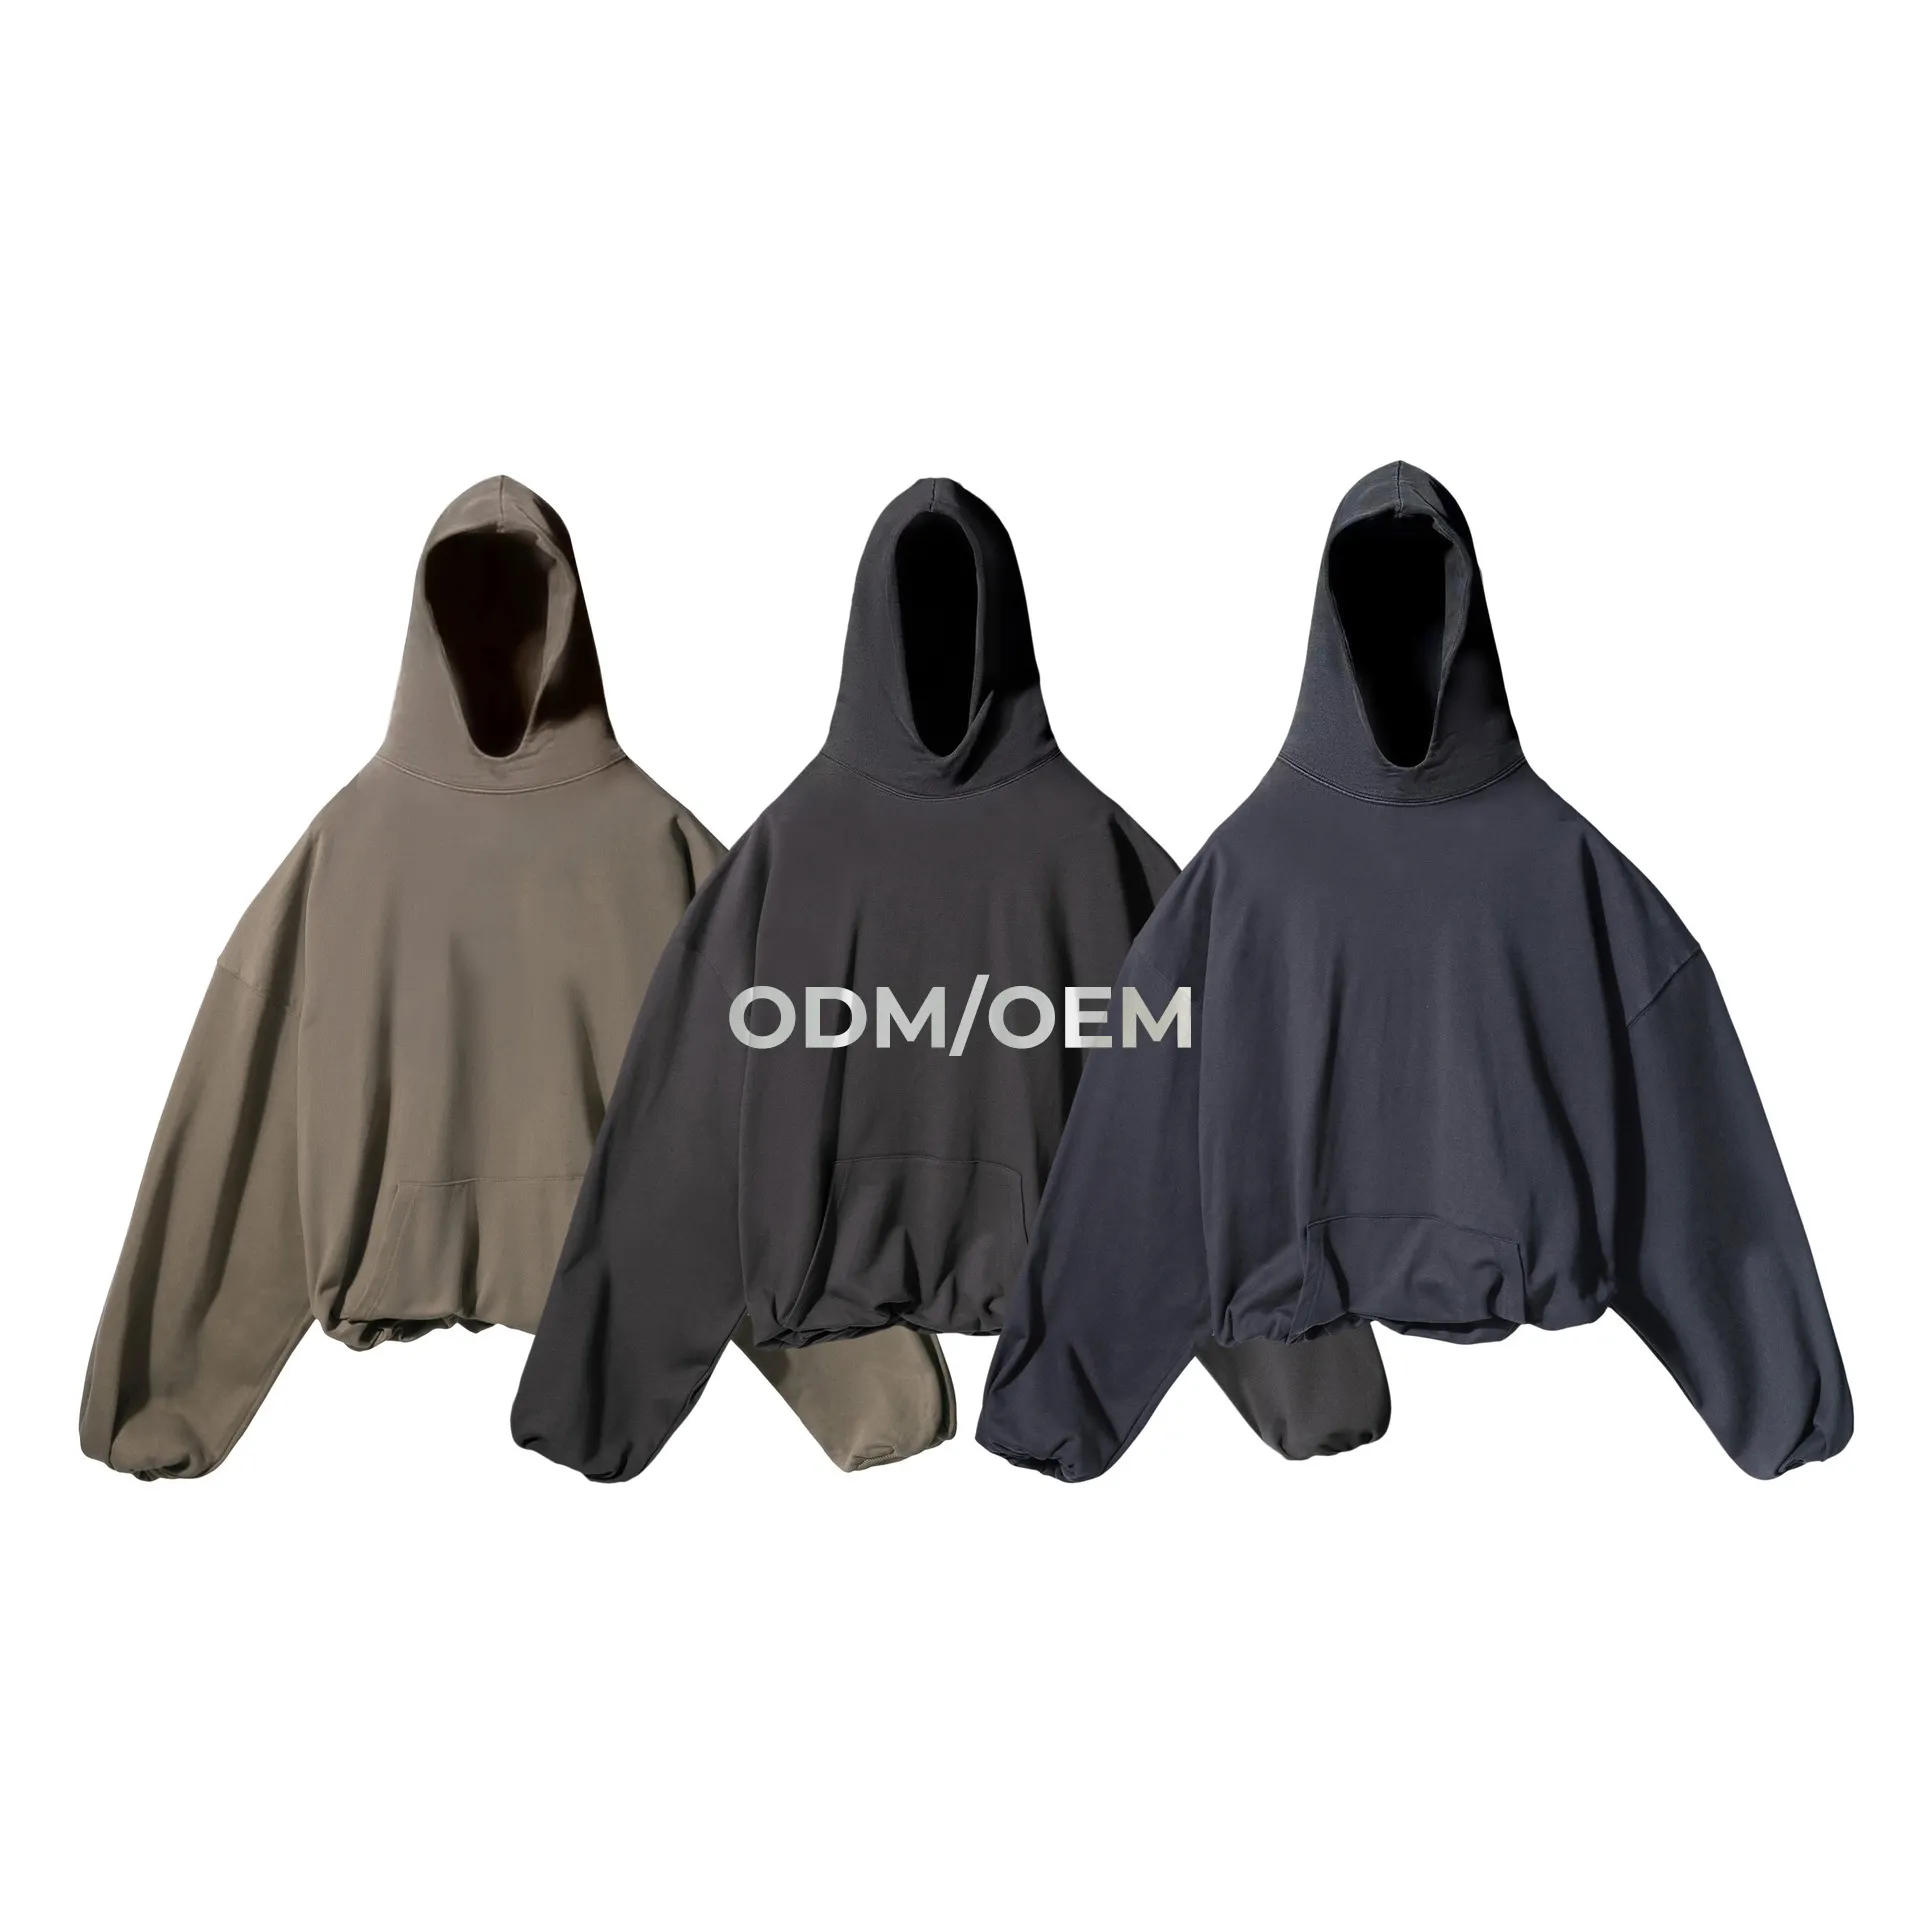 100% Cotton New Style Customize Street Swear Unisex Oversize Loose Terry Plus Size Men'S Hoodies Printed Hoodie